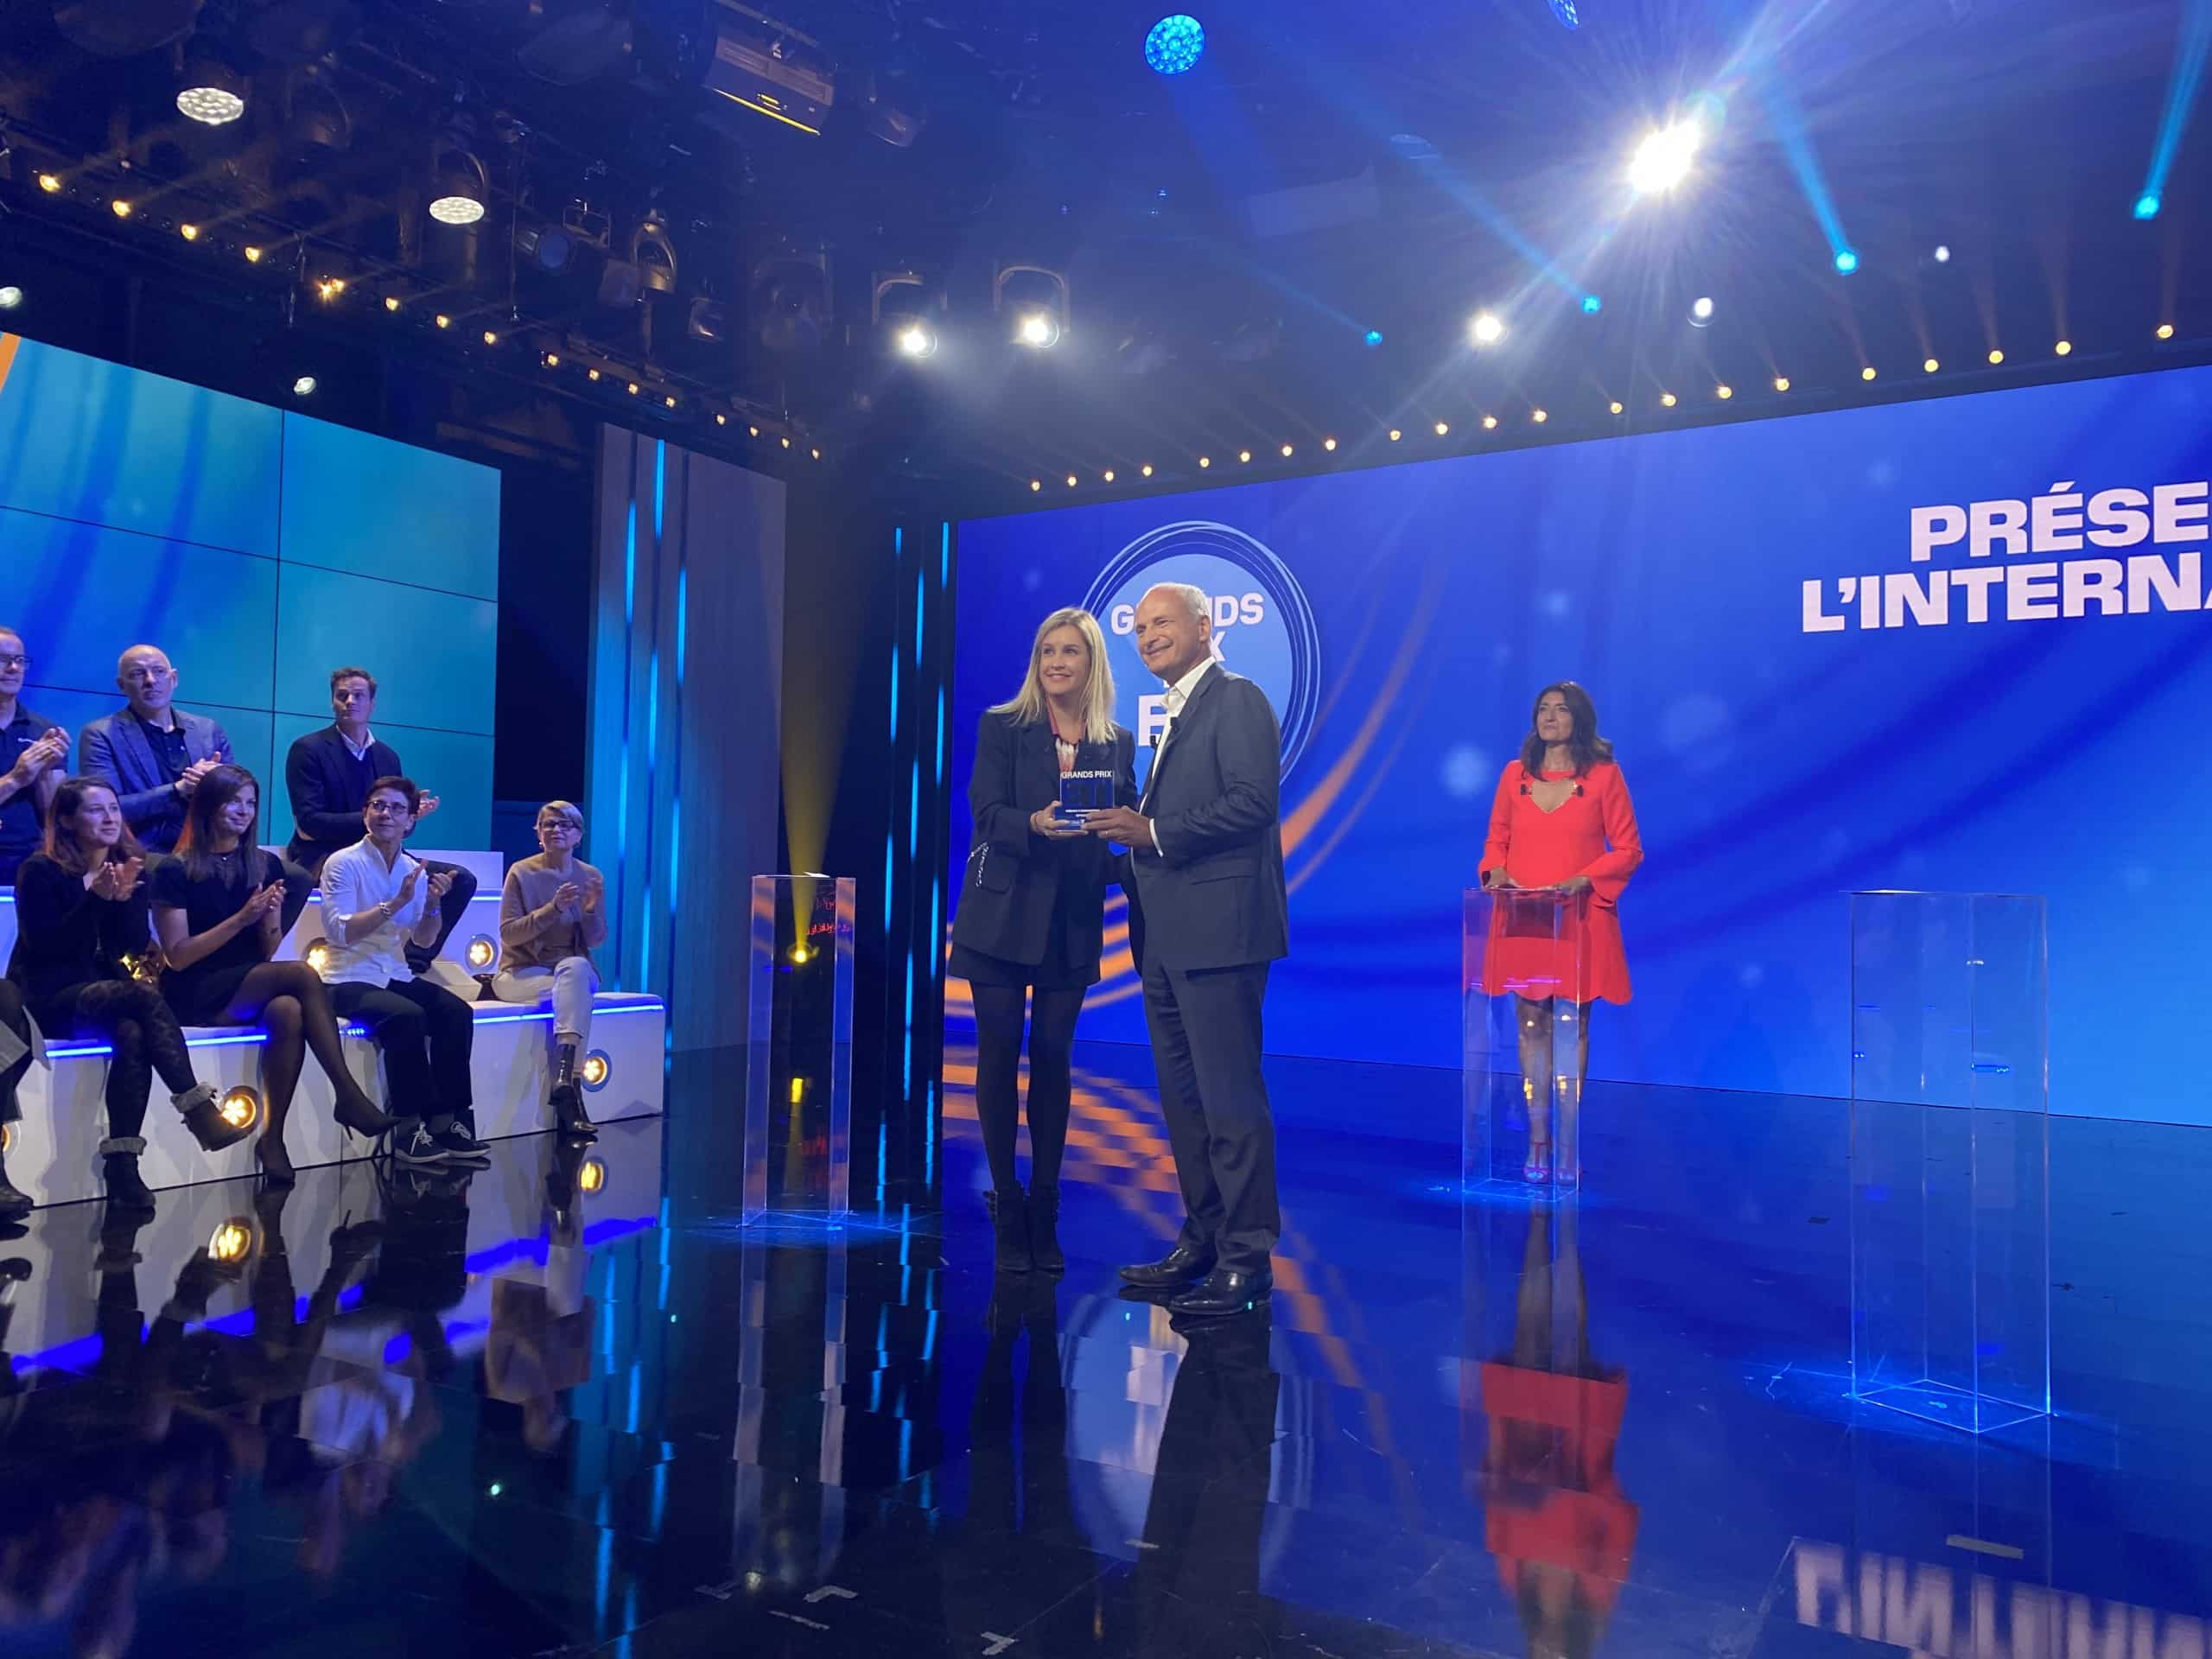 The French business news channel, BFM Business, hosted yesterday evening its annual Grand Prize award ceremony for mid-sized companies (“Les Grands Prix BFM Business des ETI”) and we are delighted to announce that Septodont has won the Grand Prize in the International category.